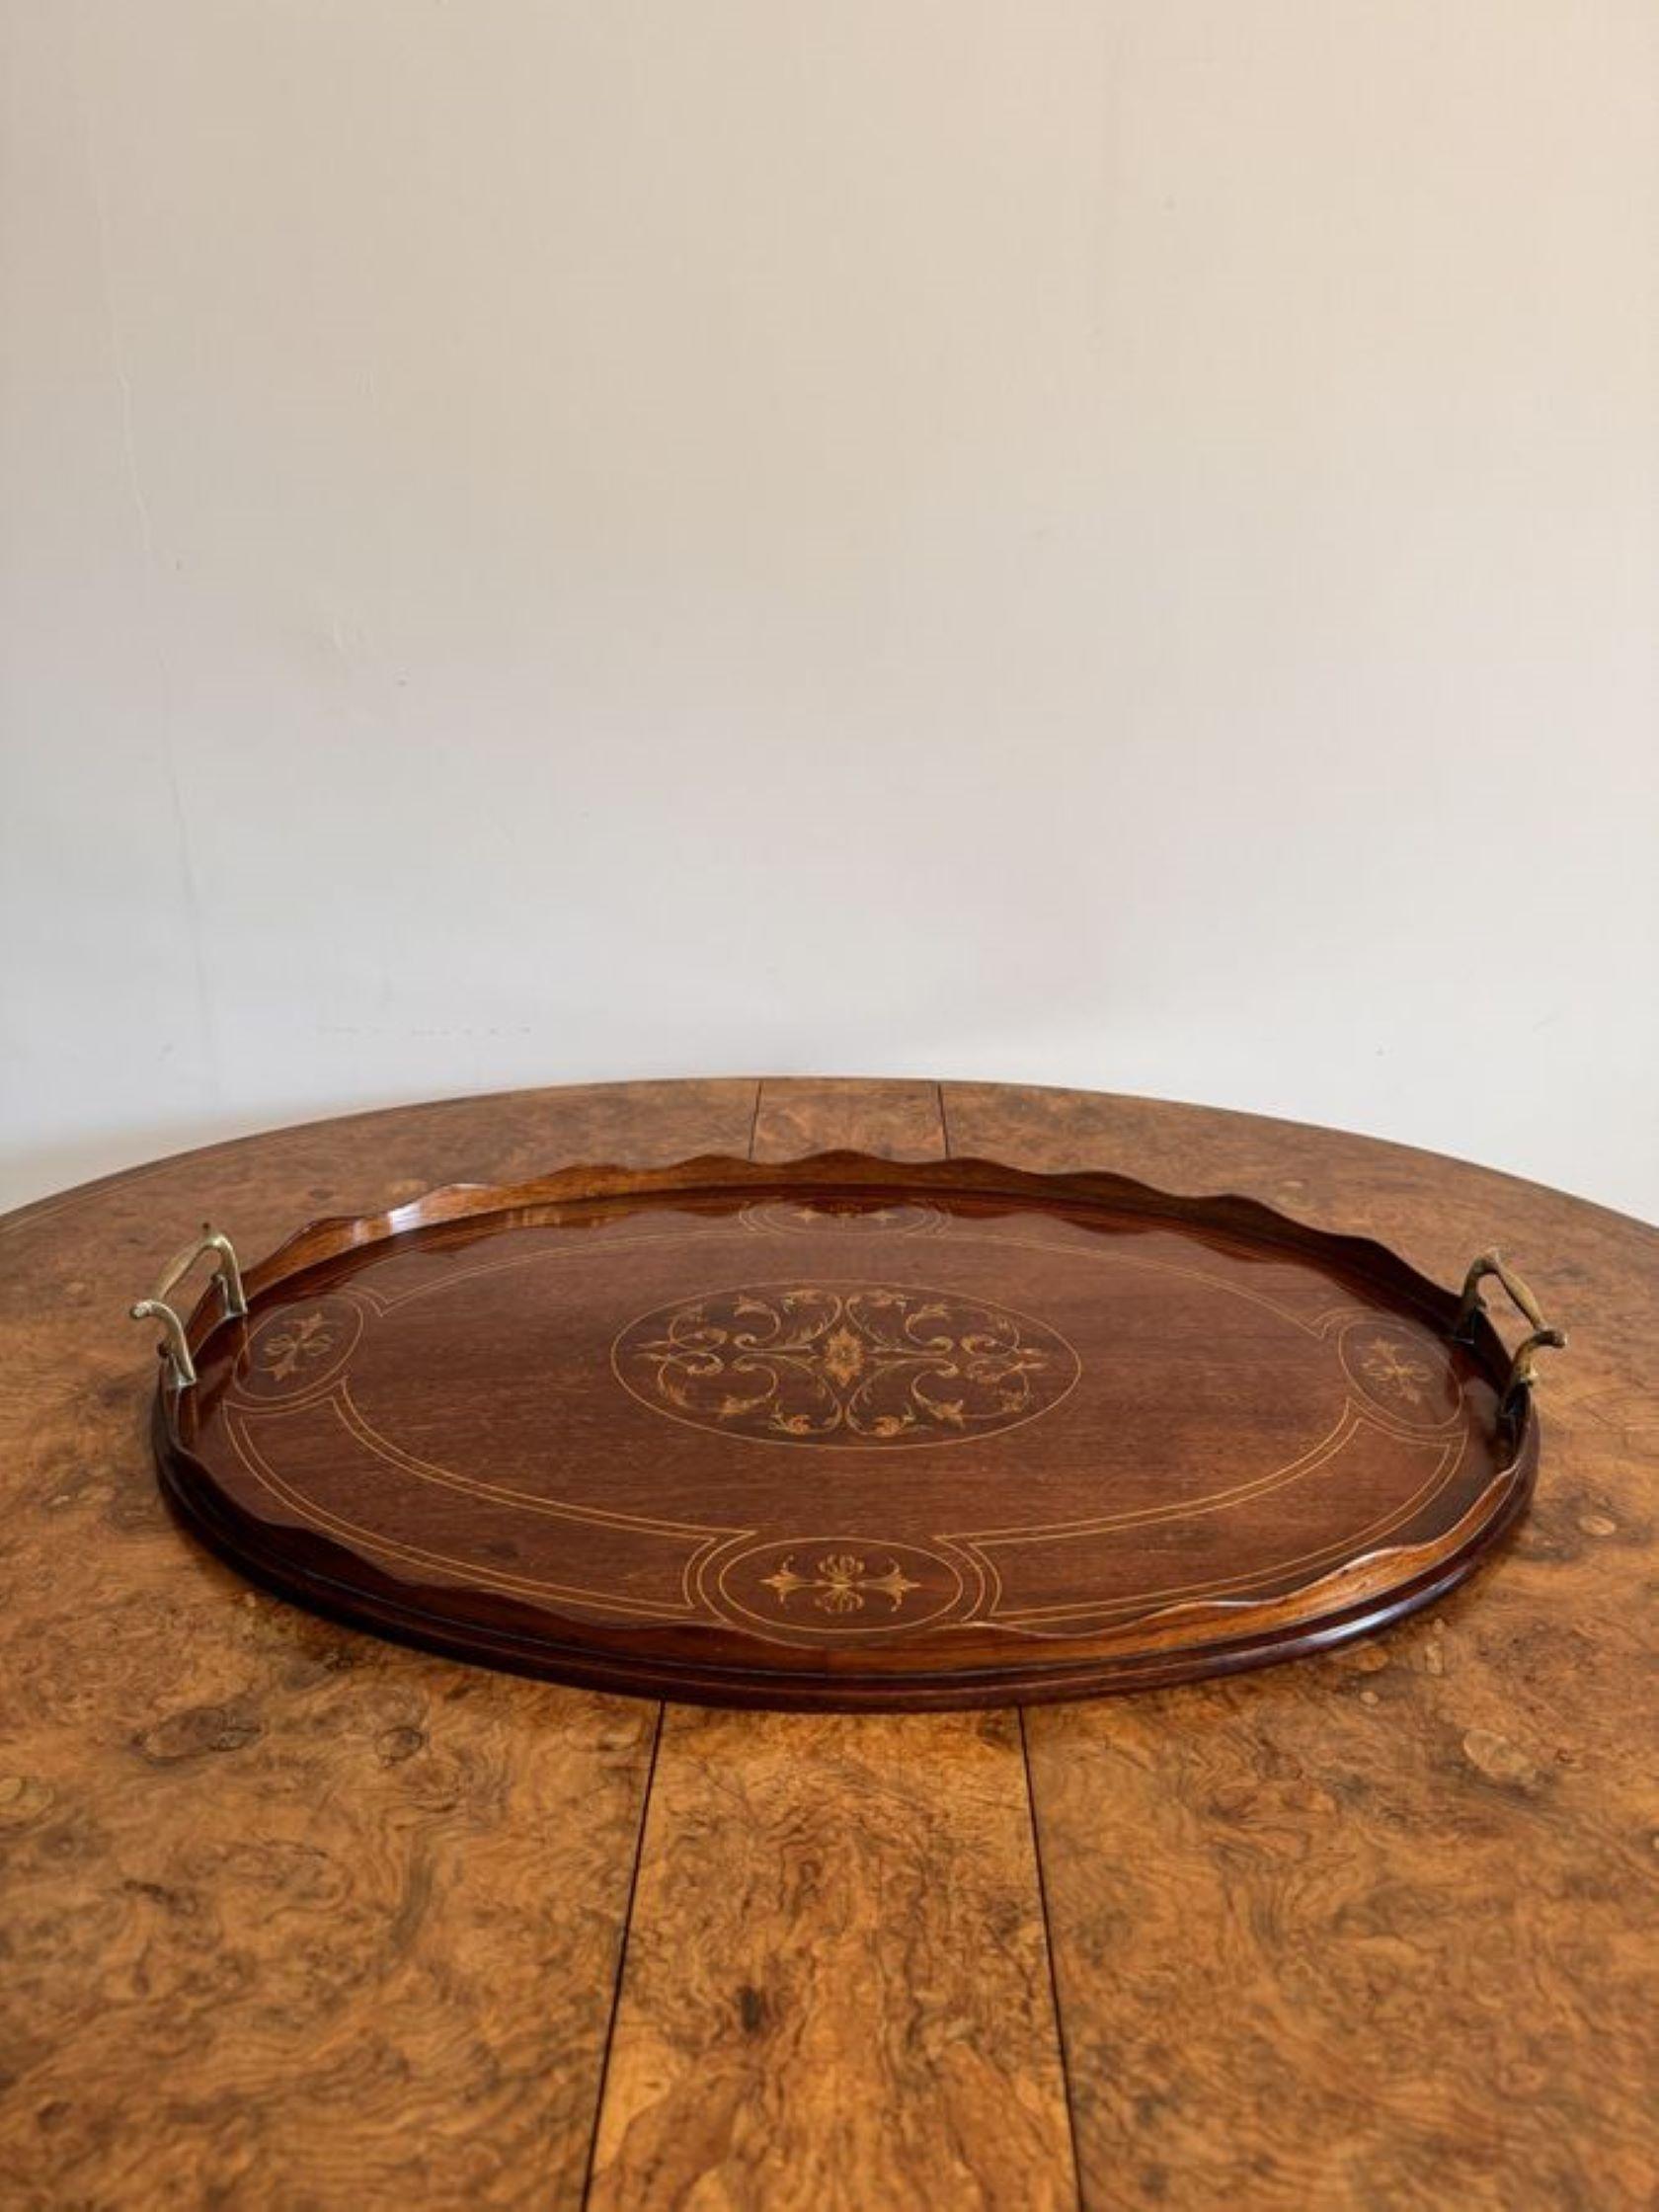 Quality antique Edwardian mahogany inlaid oval tea tray For Sale 2